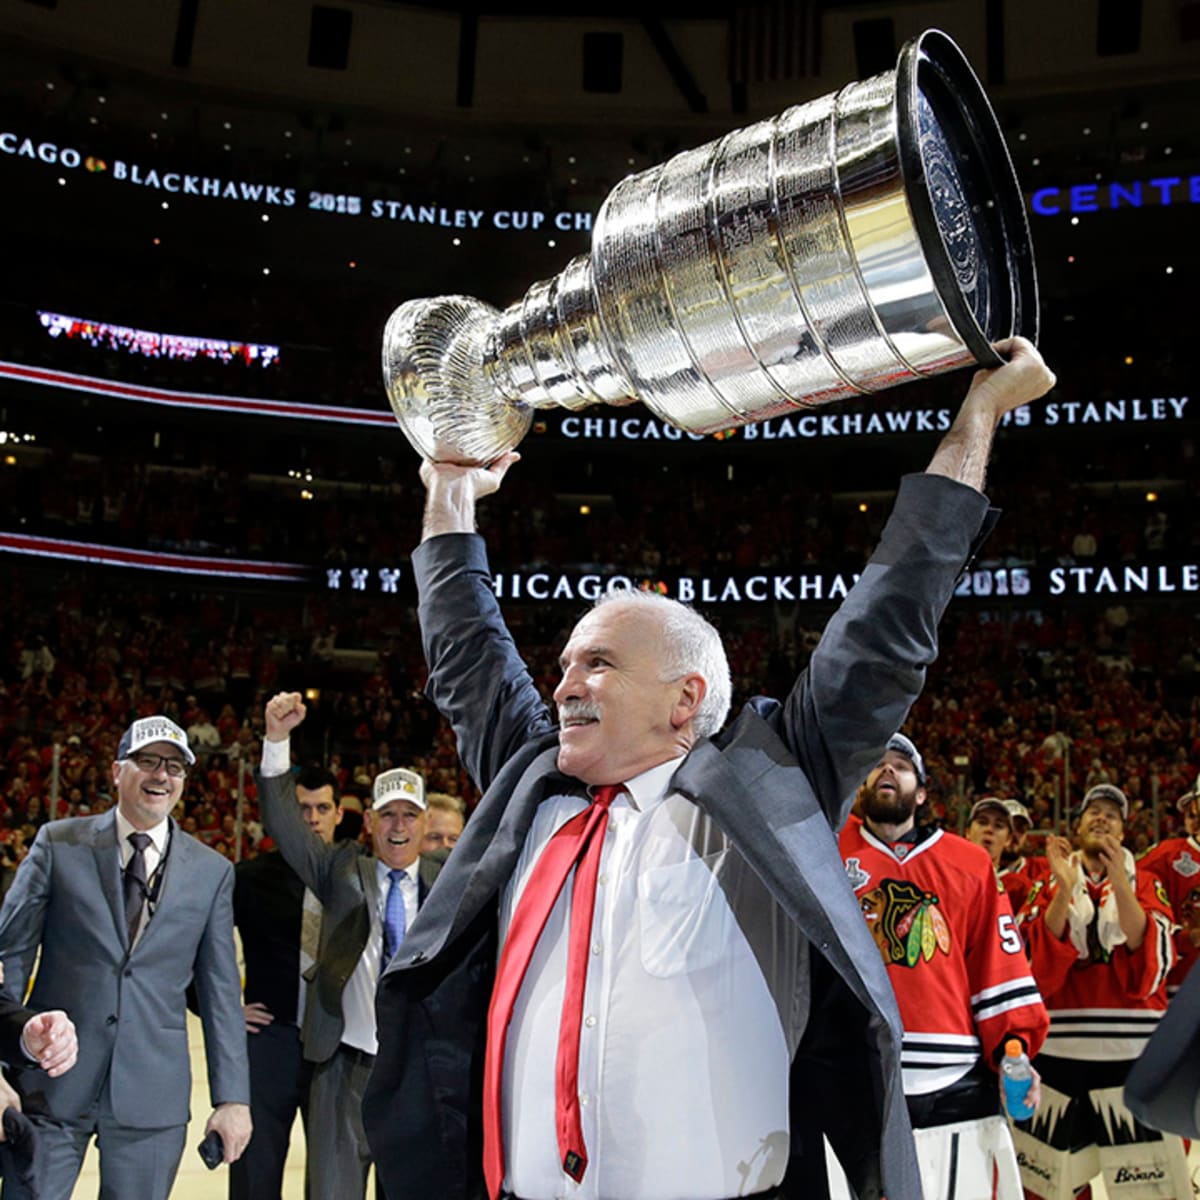 The Stanley Cup wasn't in the building when Blackhawks won in 1938 